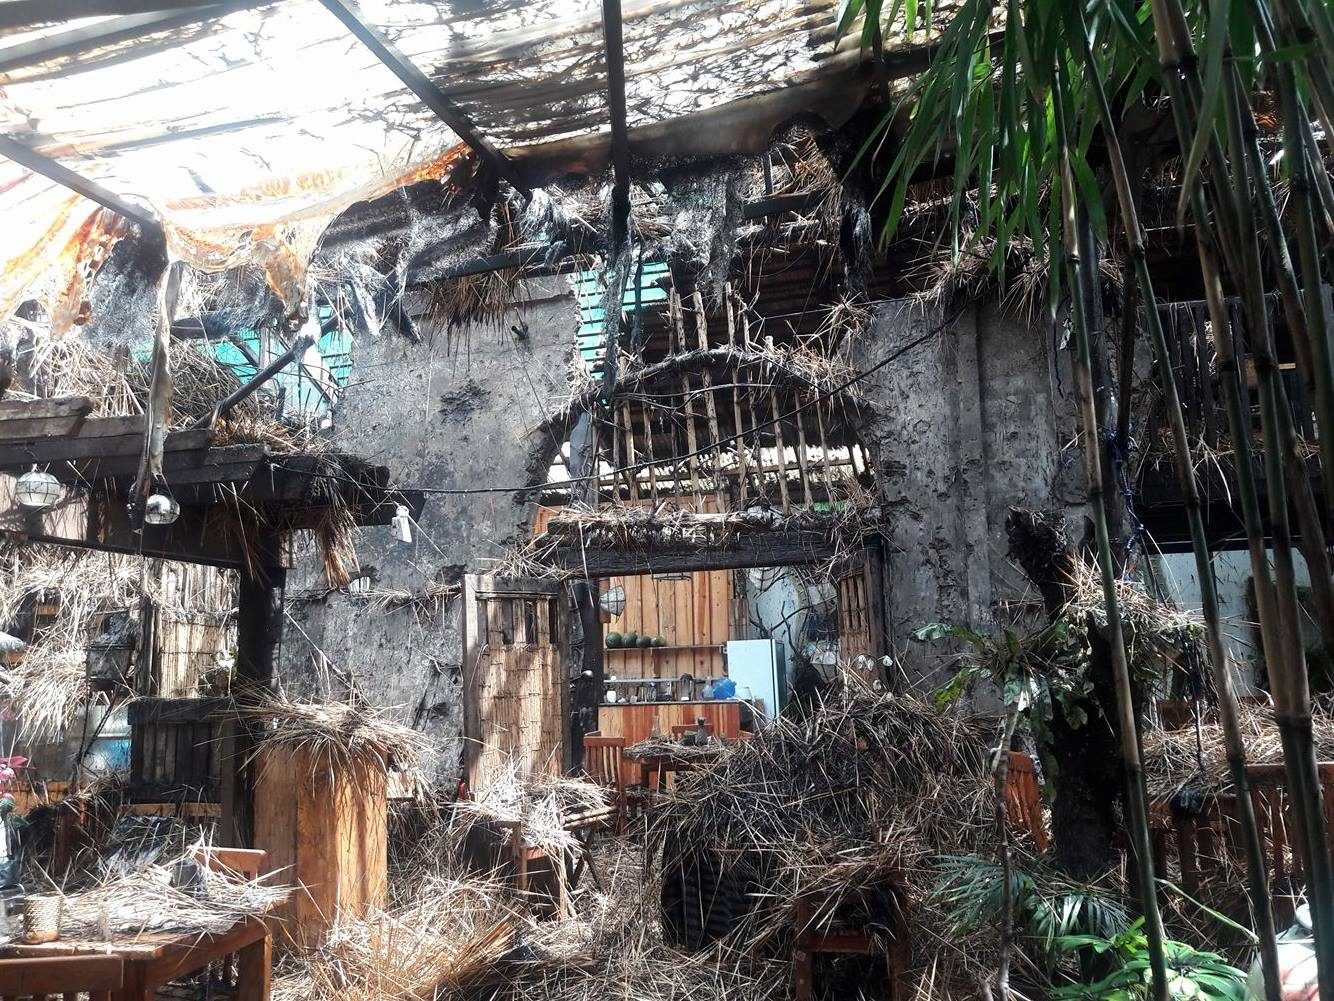 Baguio’s famed Cafe by the Ruins catches fire